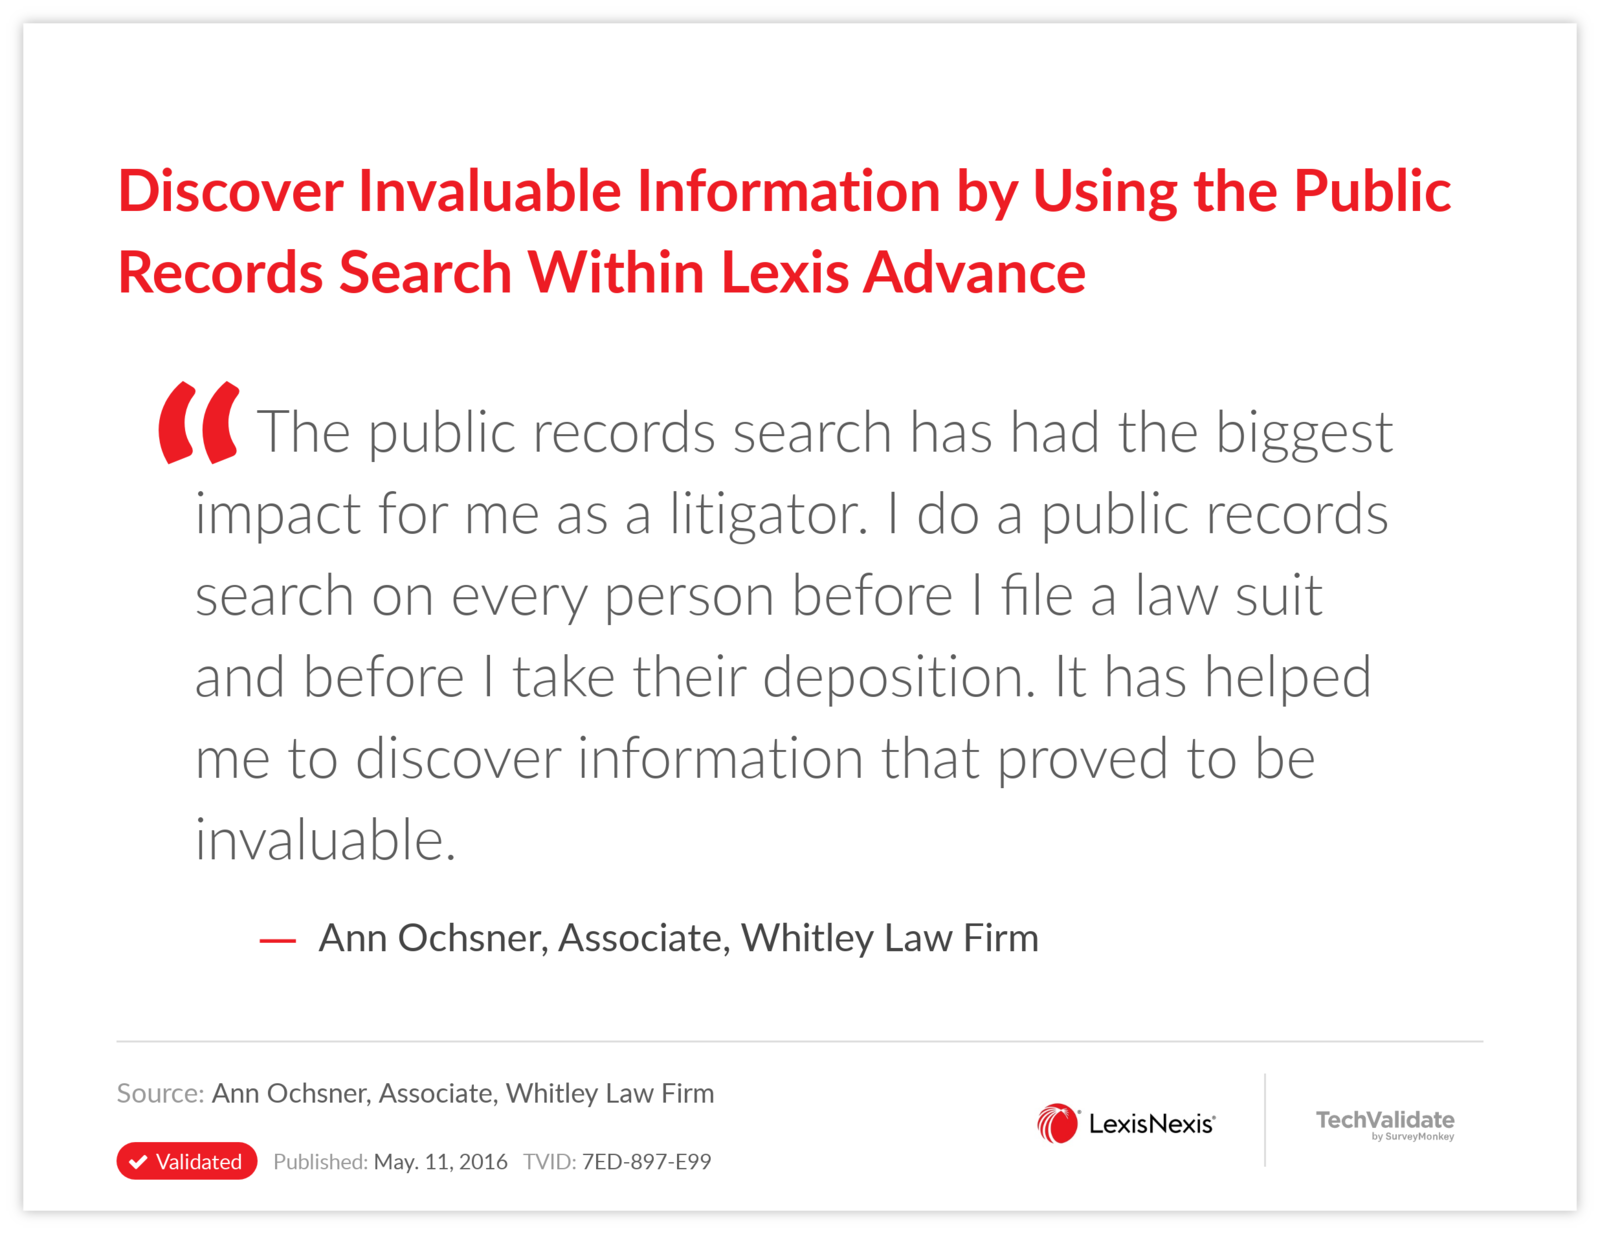 Discover Invaluable Information by Using the Public Records Search Within Lexis Advance